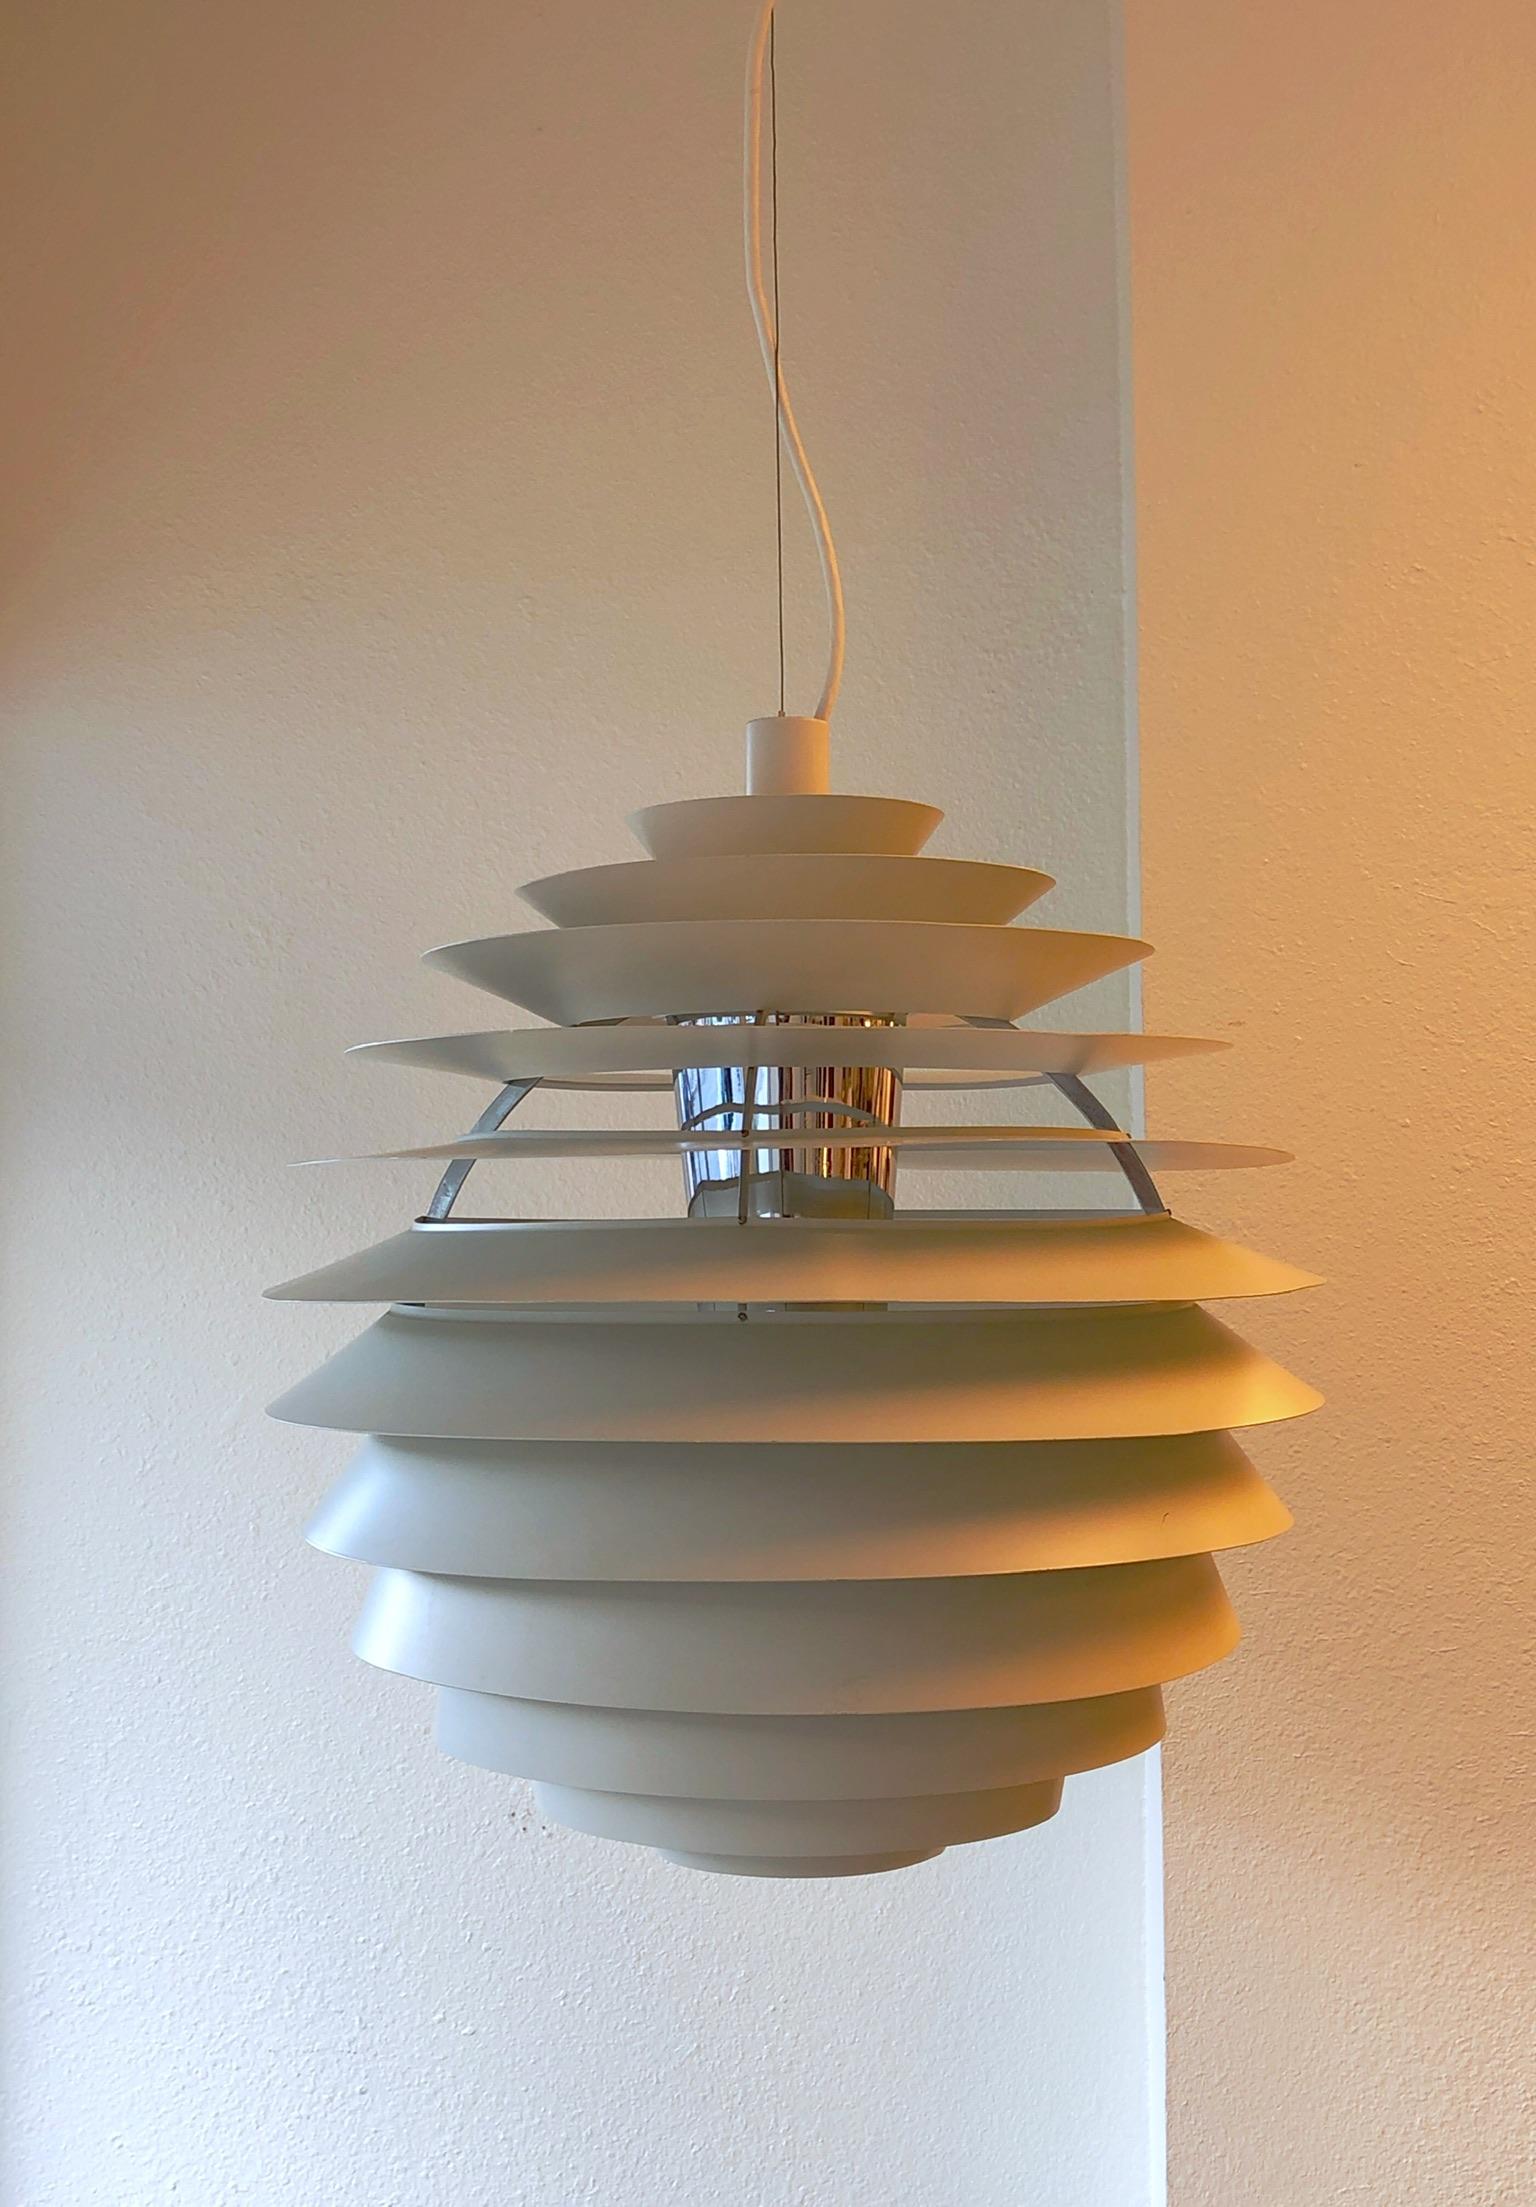 Original off white and polish chrome PHL pendant lamp by Danish designer Poul Hennissen for Louis Poulsen design in 1957. It’s in original condition, retains all the labels from 1957 and ceiling cap. 

Measurements: 25.6” high and 23.6”